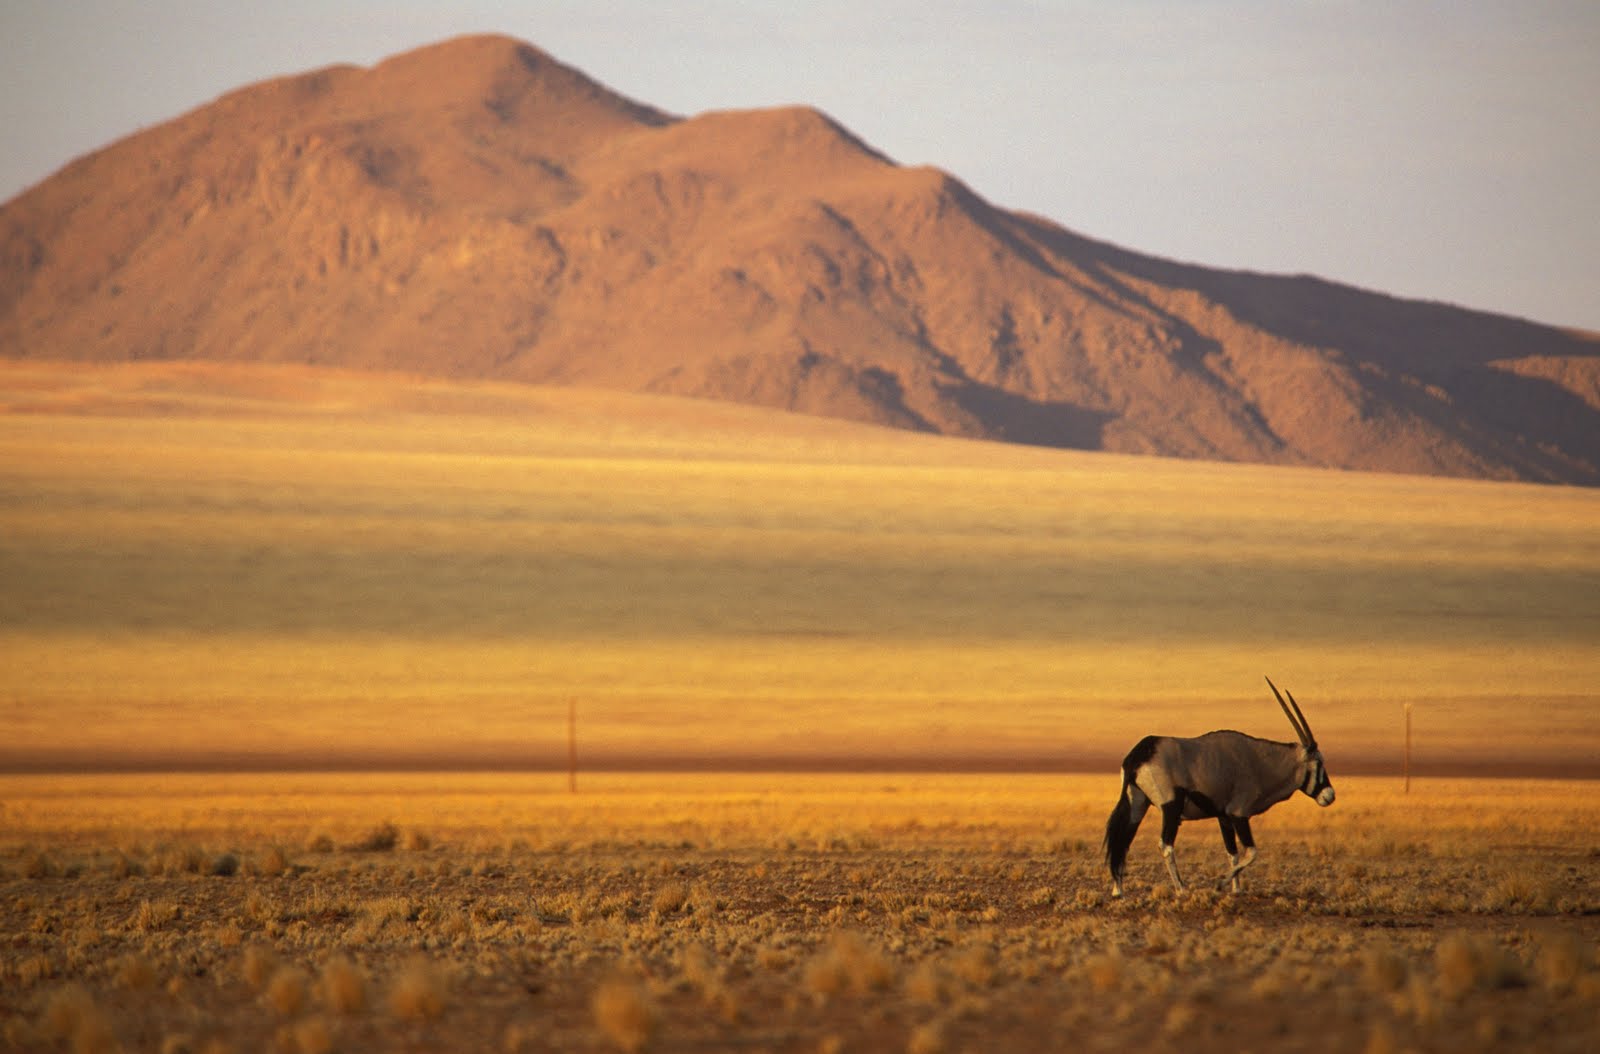 An Oryx is a large antelope native to arid parts of Africa. It's an ...